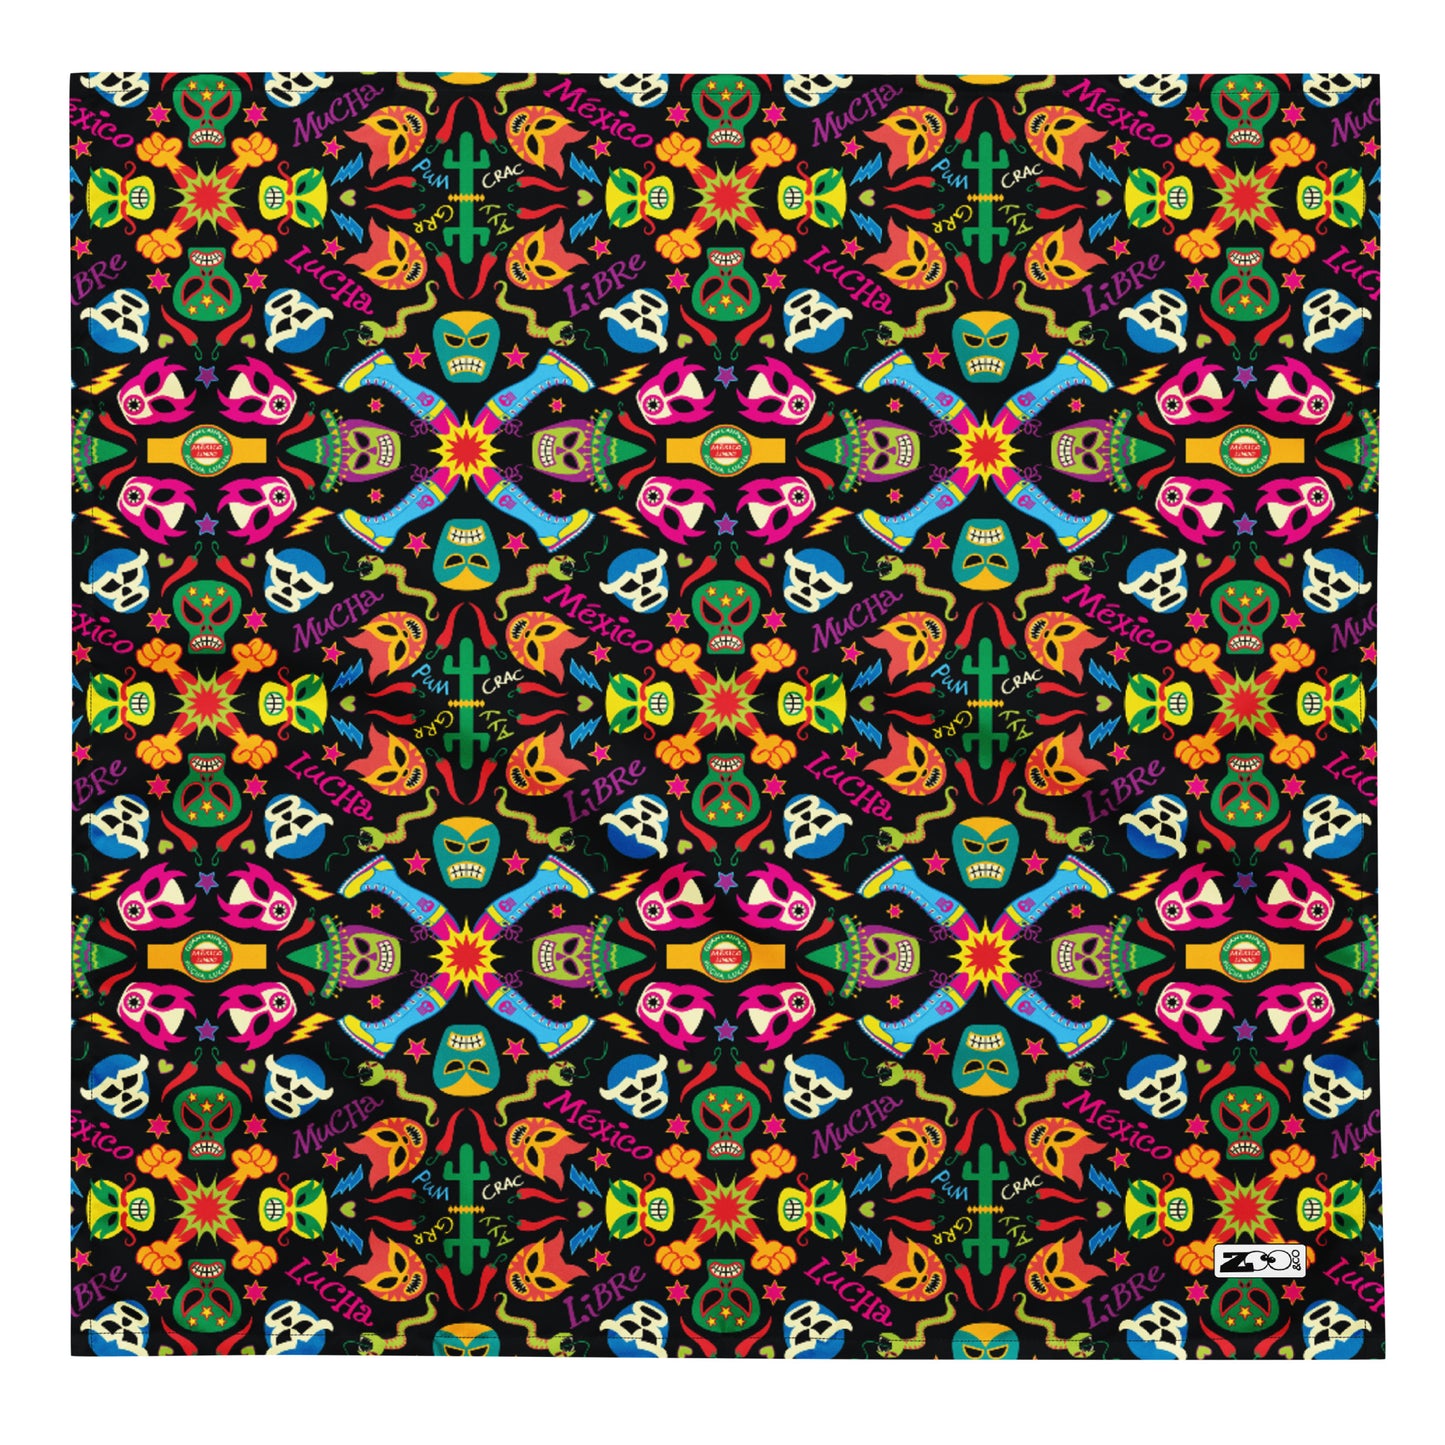 Mexican wrestling colorful party All-over print bandana. Large size